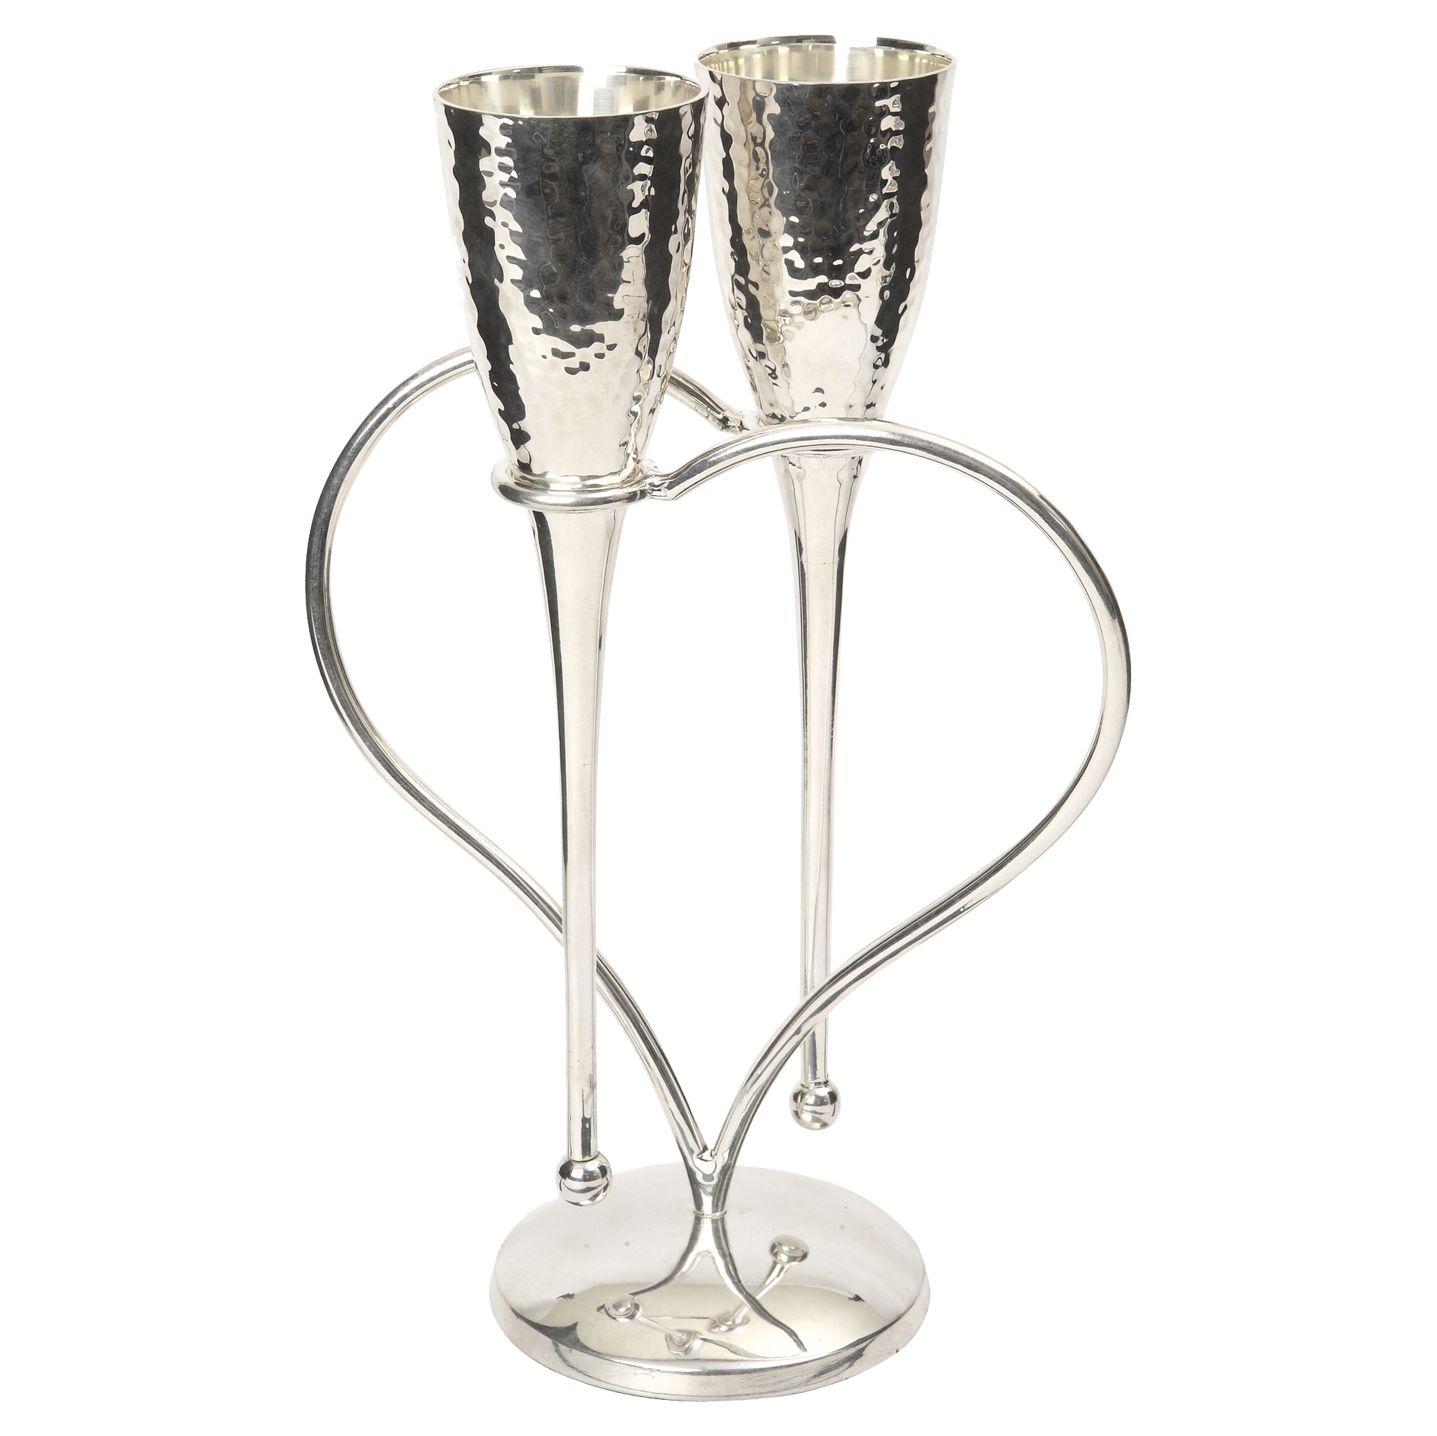 Culinary Concepts Amore Heart Champagne Flutes